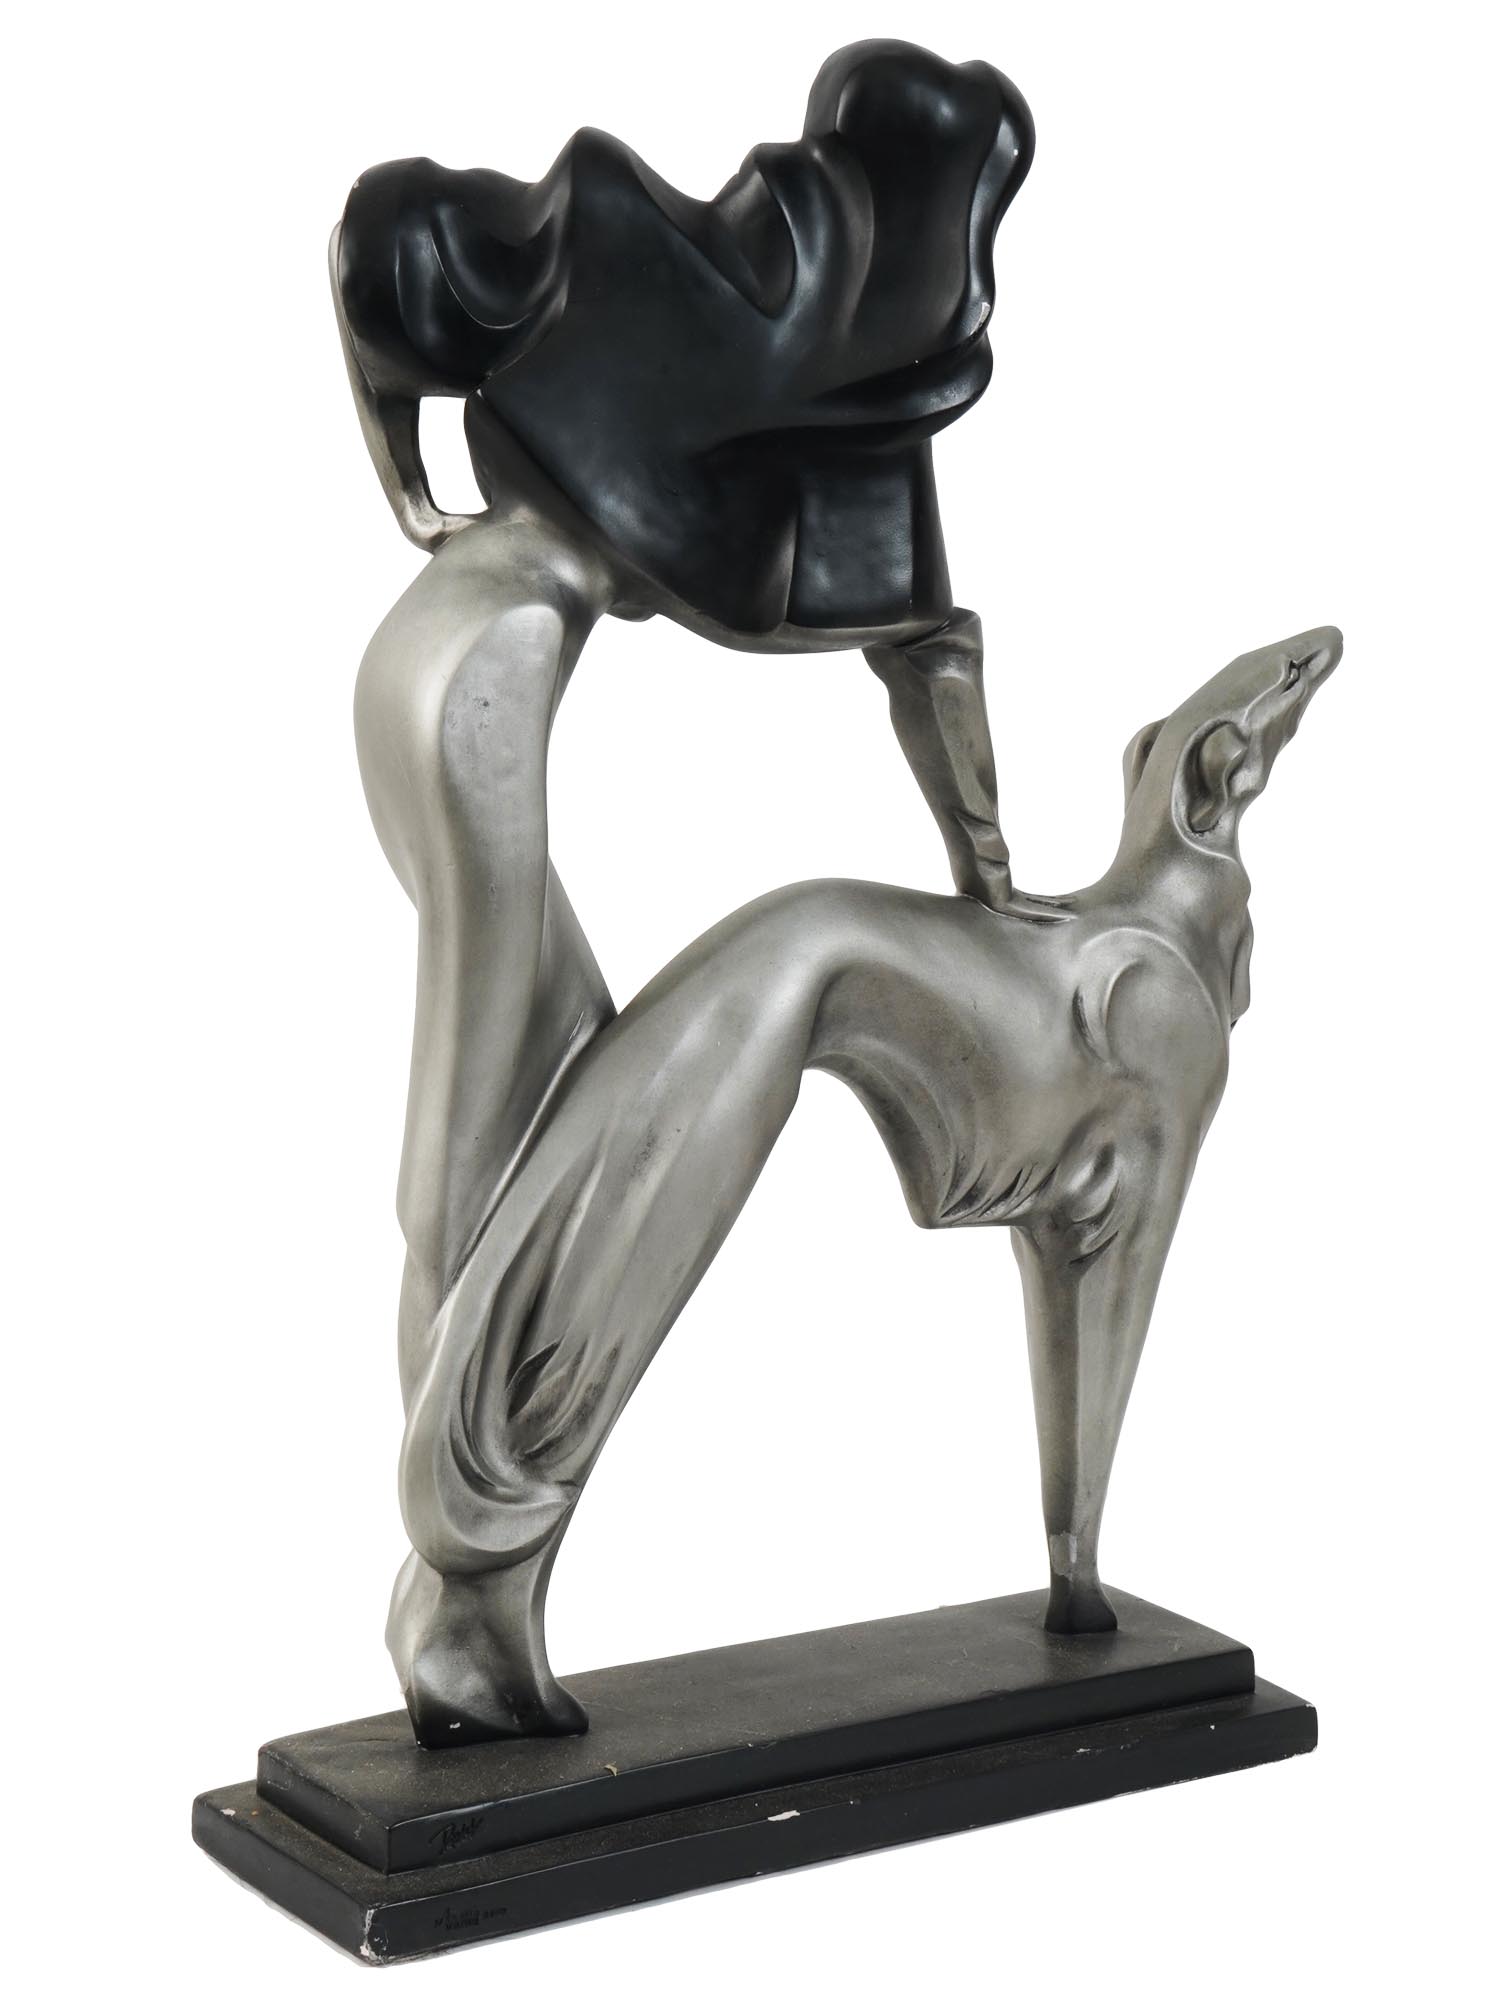 AUSTIN PRODUCTIONS METAL FIGURE OF WOMAN WITH DOG PIC-1